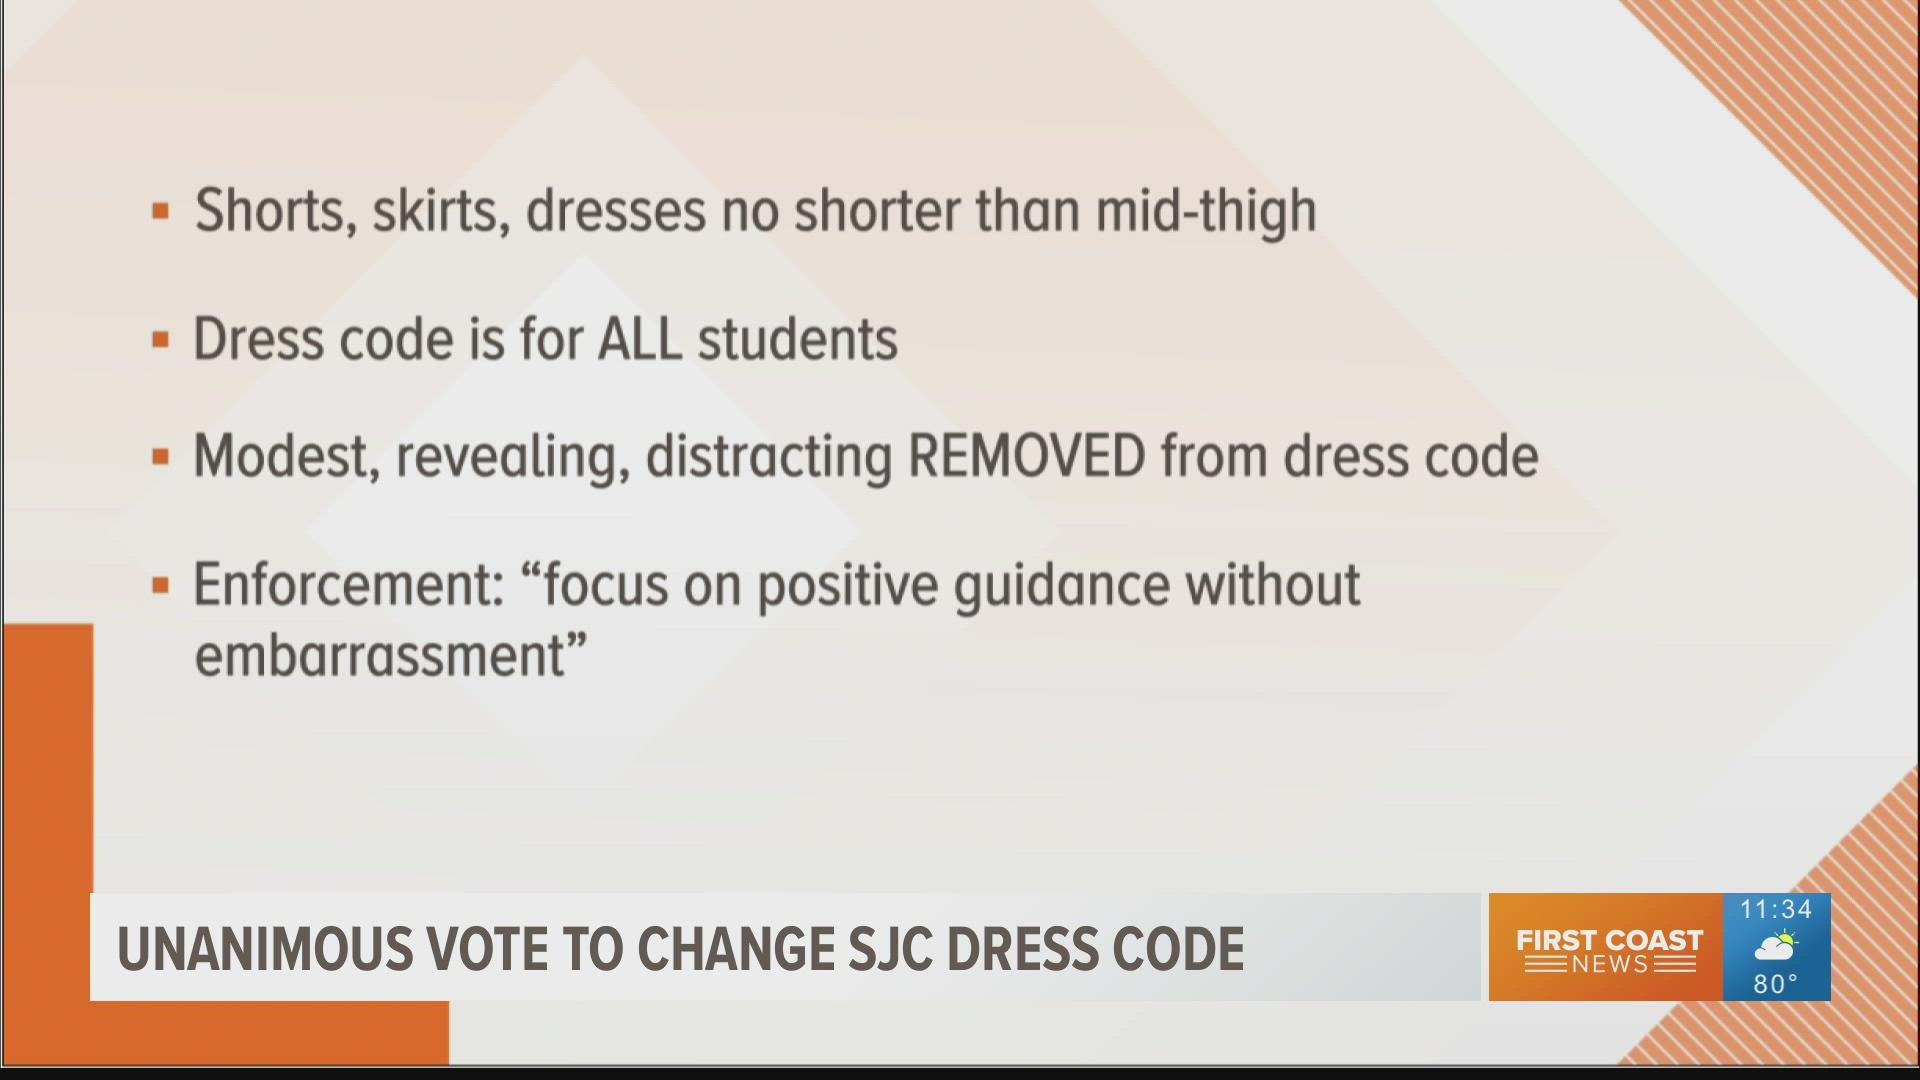 The St. Johns County school board has unanimously voted to approve a new dress code policy Tuesday.